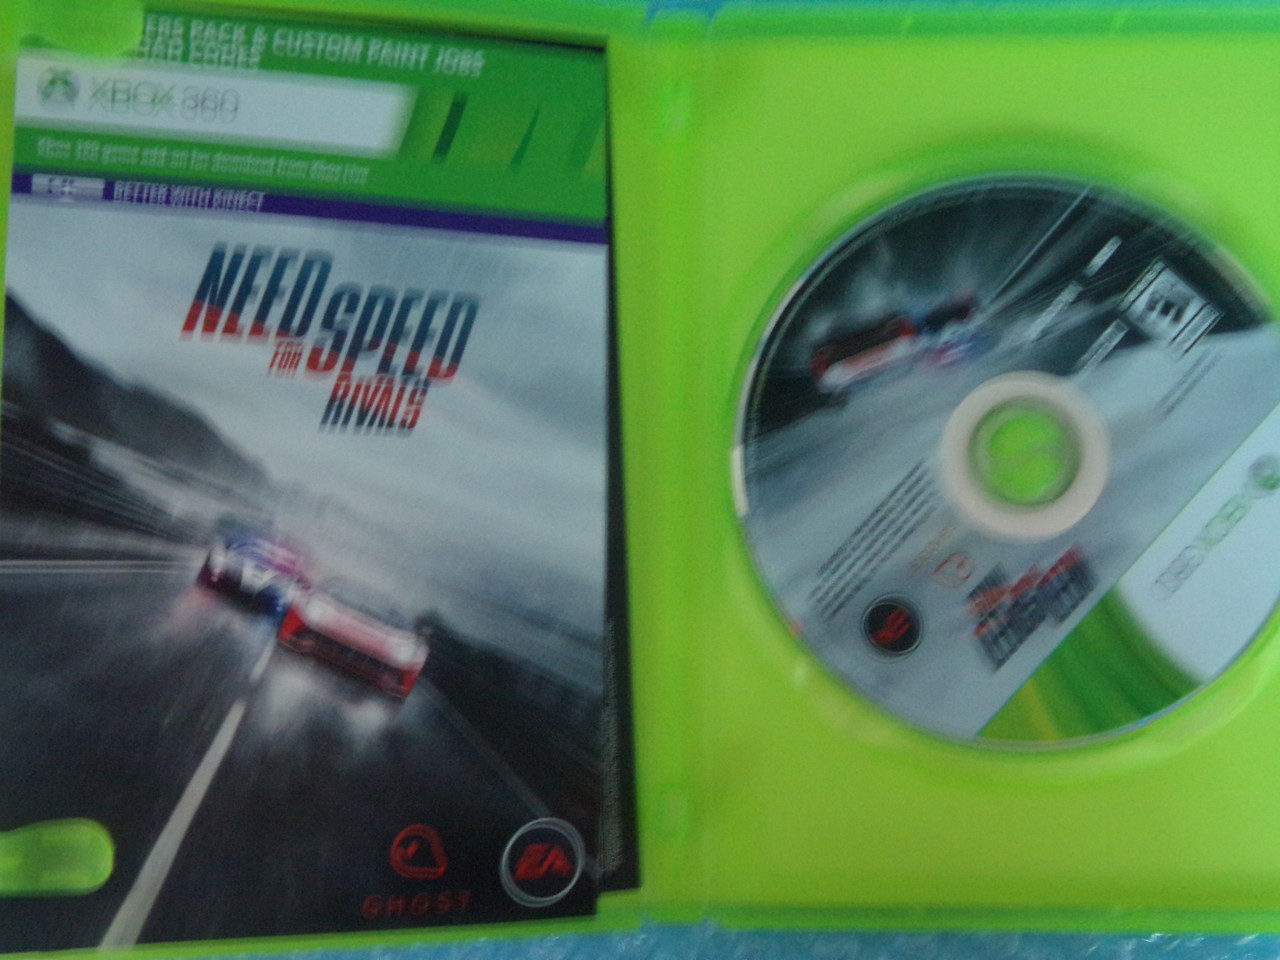 Video Game Need For Speed: Rivals Russian Version (xbox 360) Used